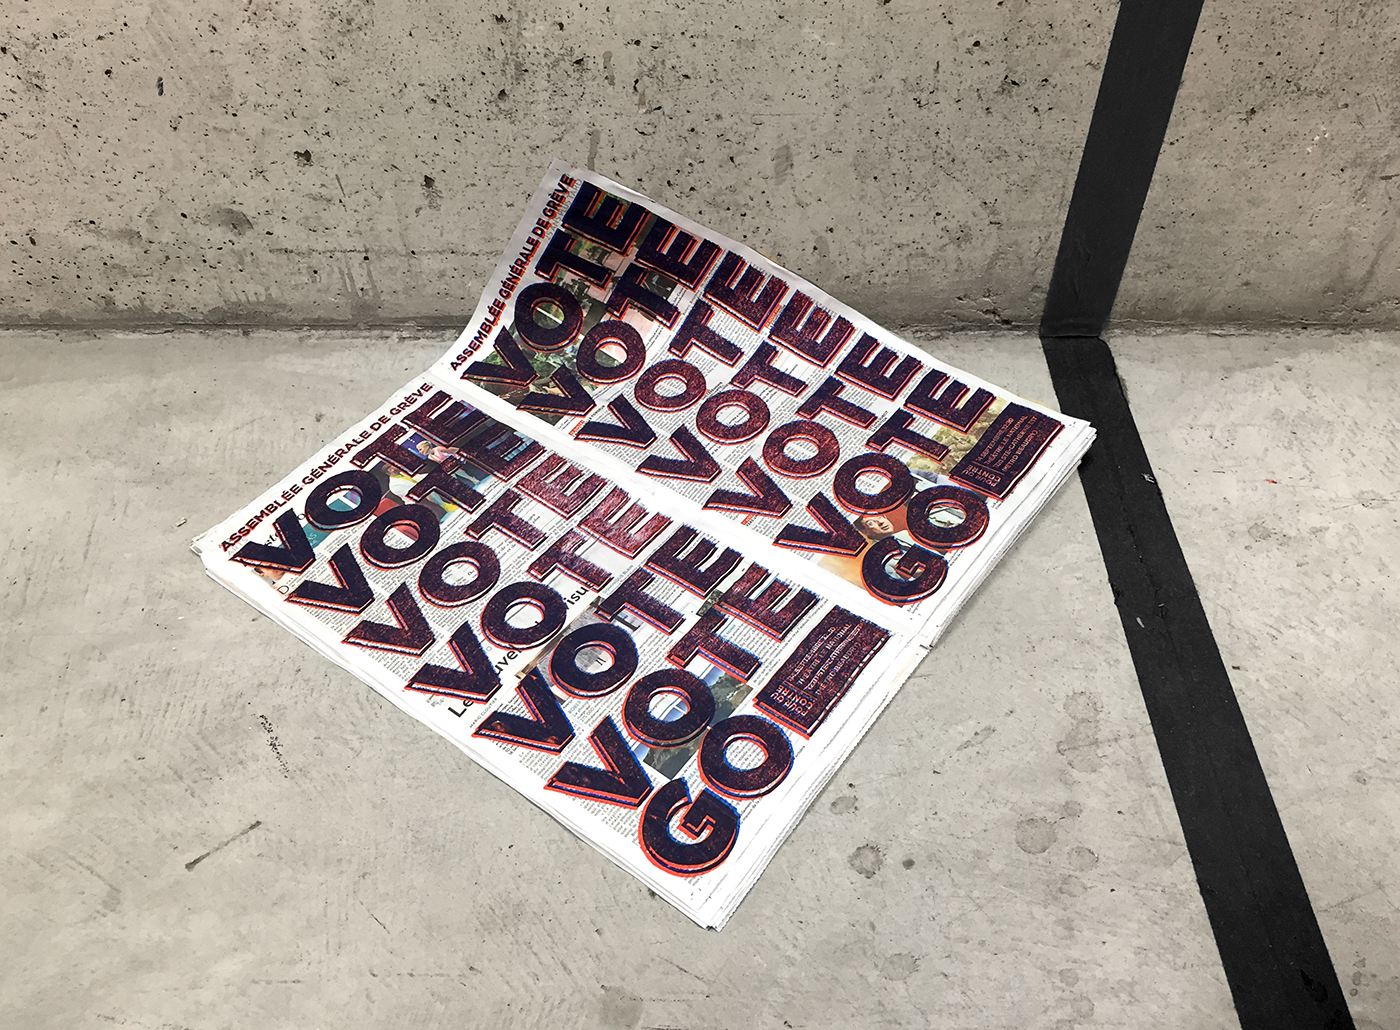 journal news pepper screen printing sérigraphie Typographie student strike UQAM poster affiche engage design